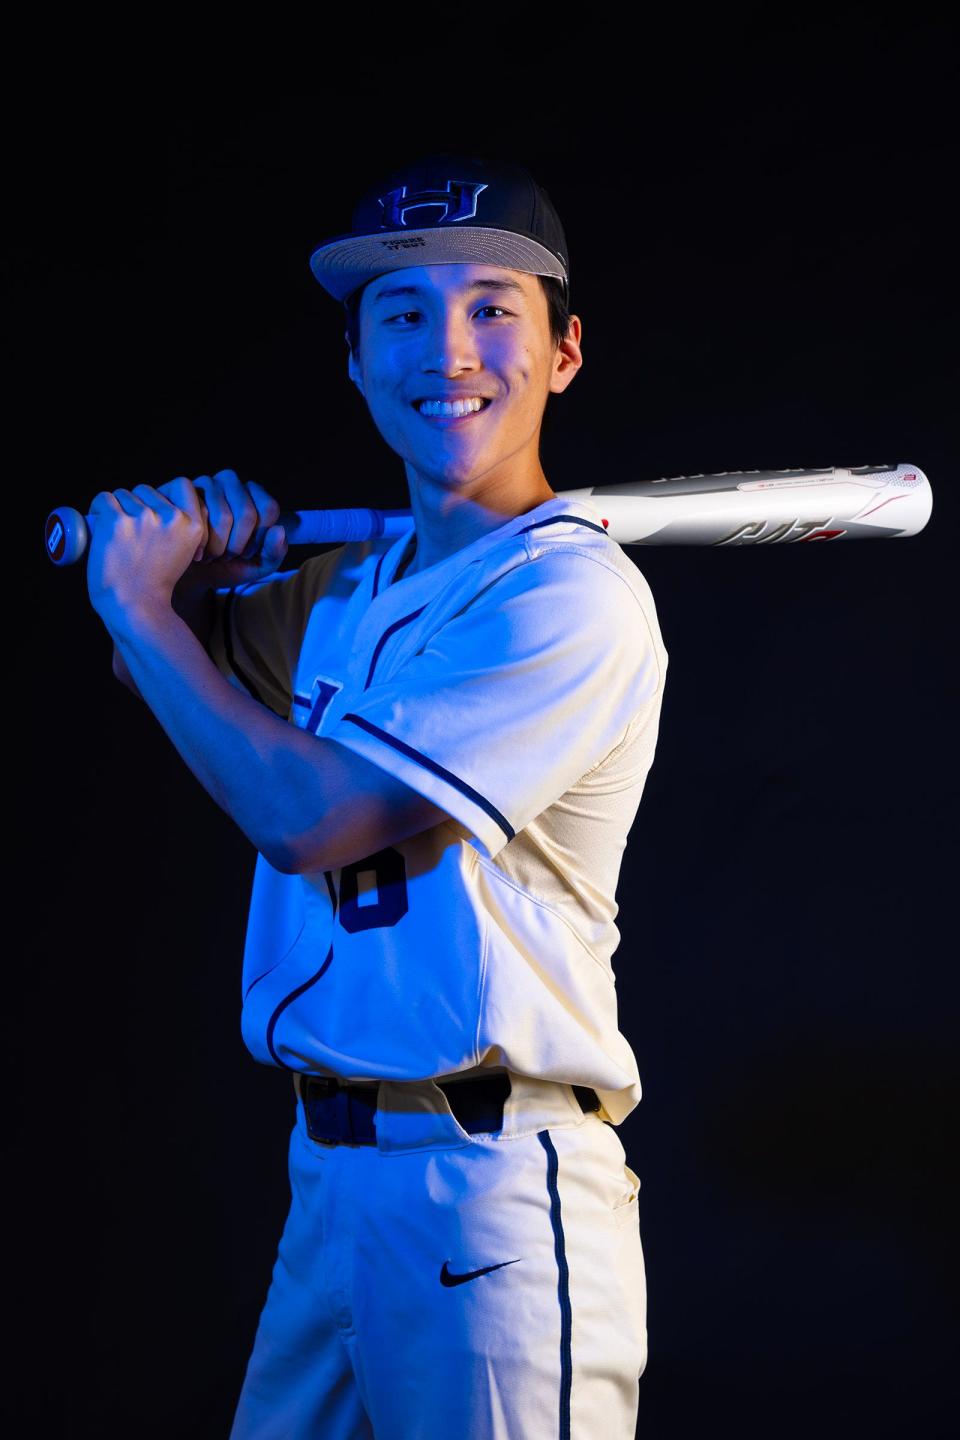 Hendrickson outfielder James Lee has lived in New Jersey, Georgia, California, South Korea, New York and Texas. He plans to study kinesiology in college.